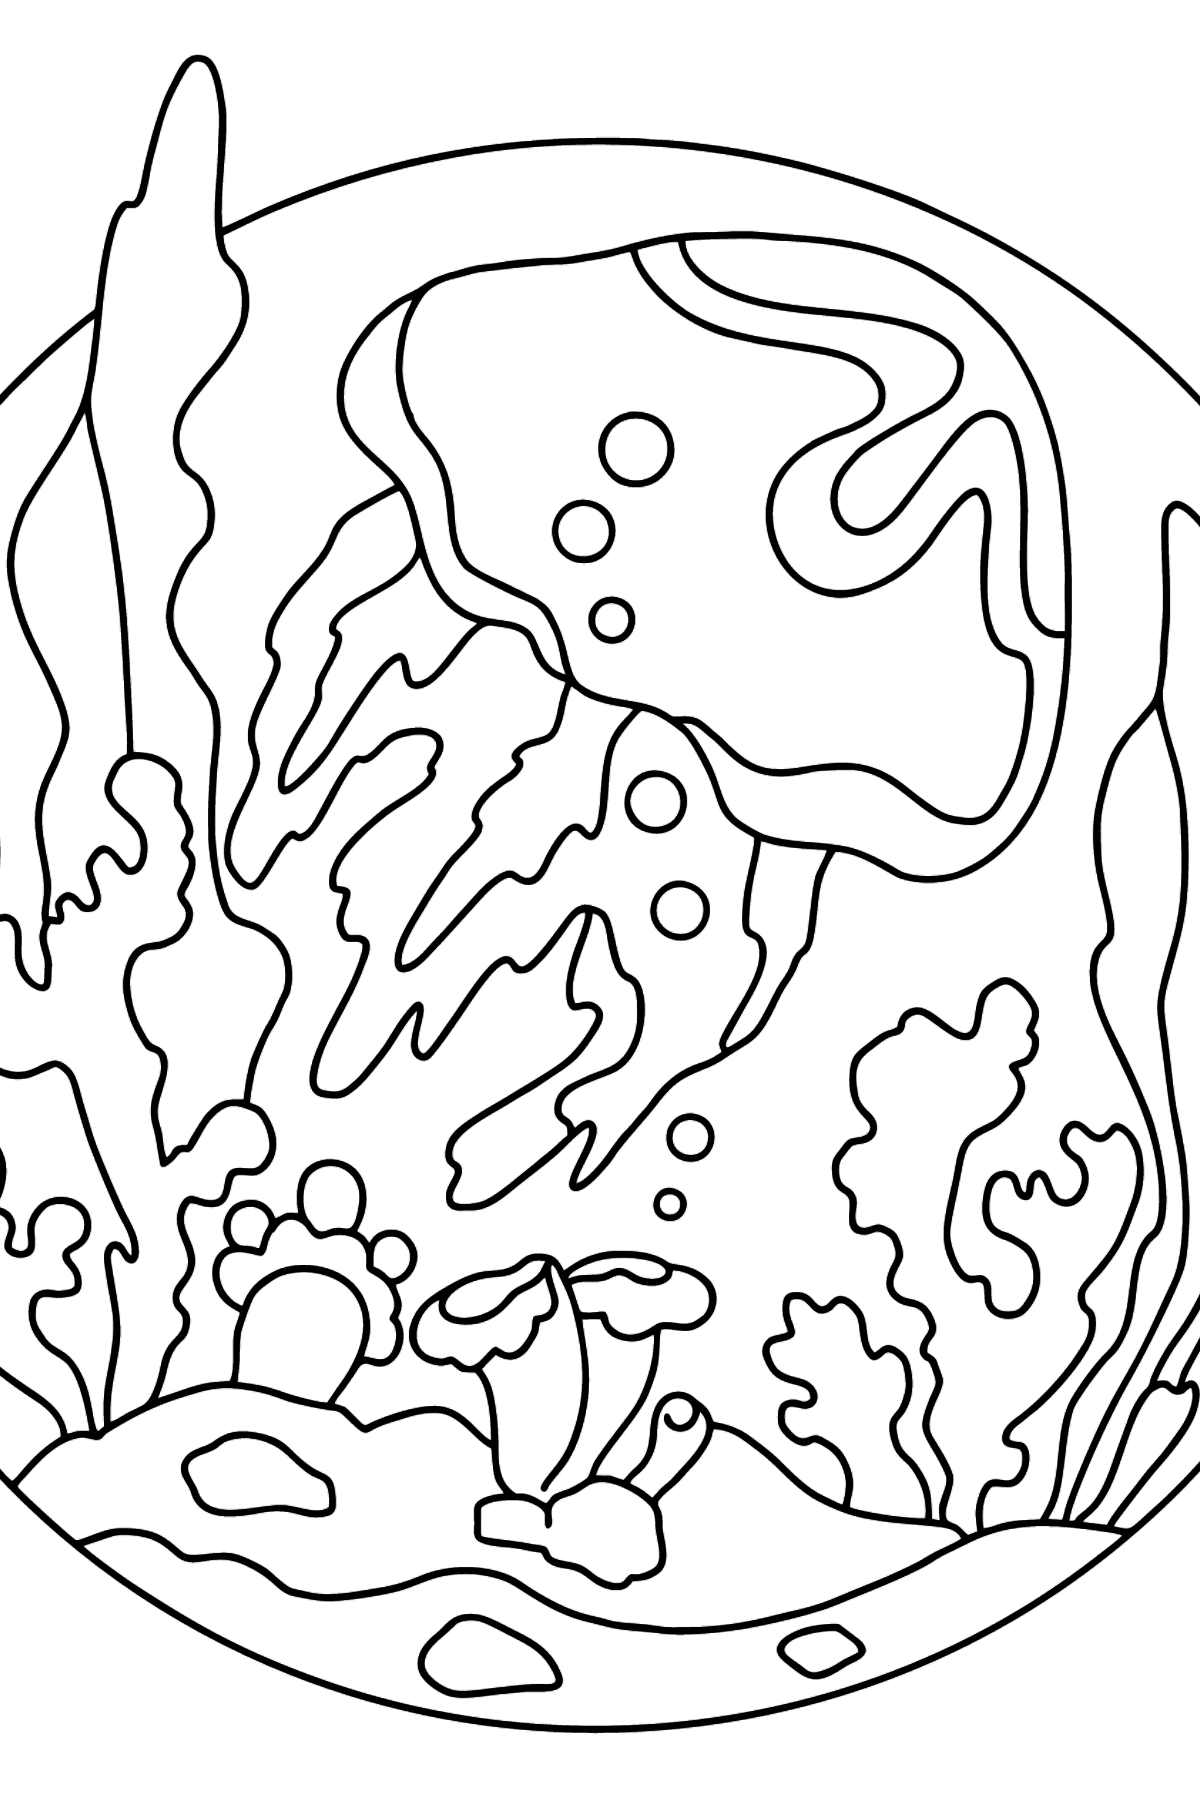 A Seethrough Jellyfish Coloring Page - Coloring Pages for Kids